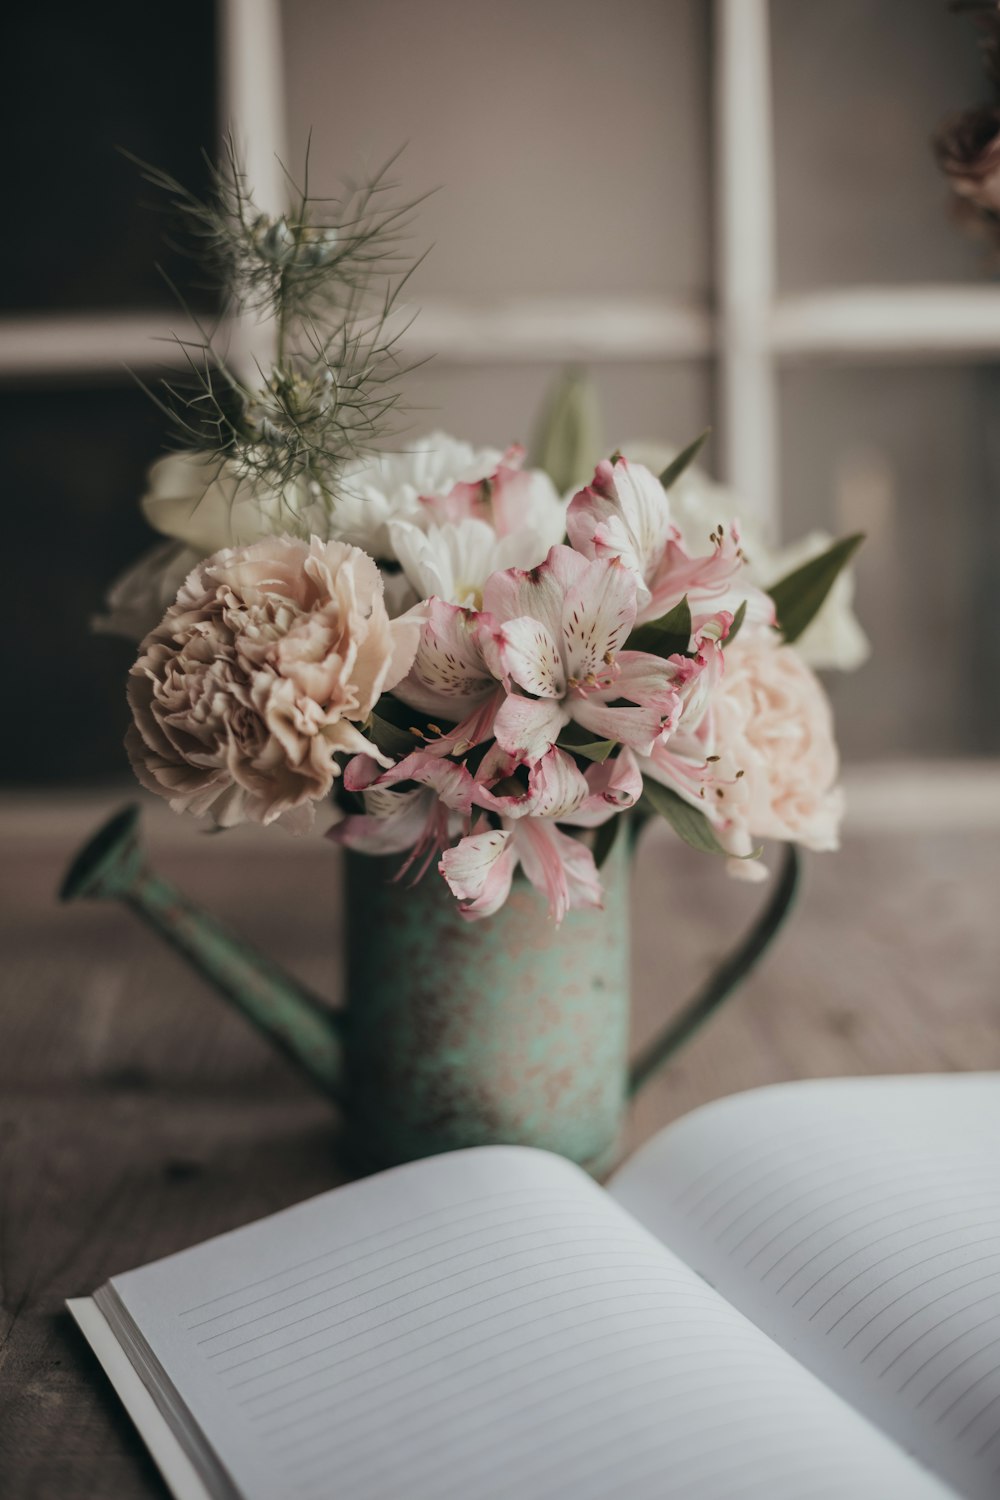 a book and a vase with flowers on a table